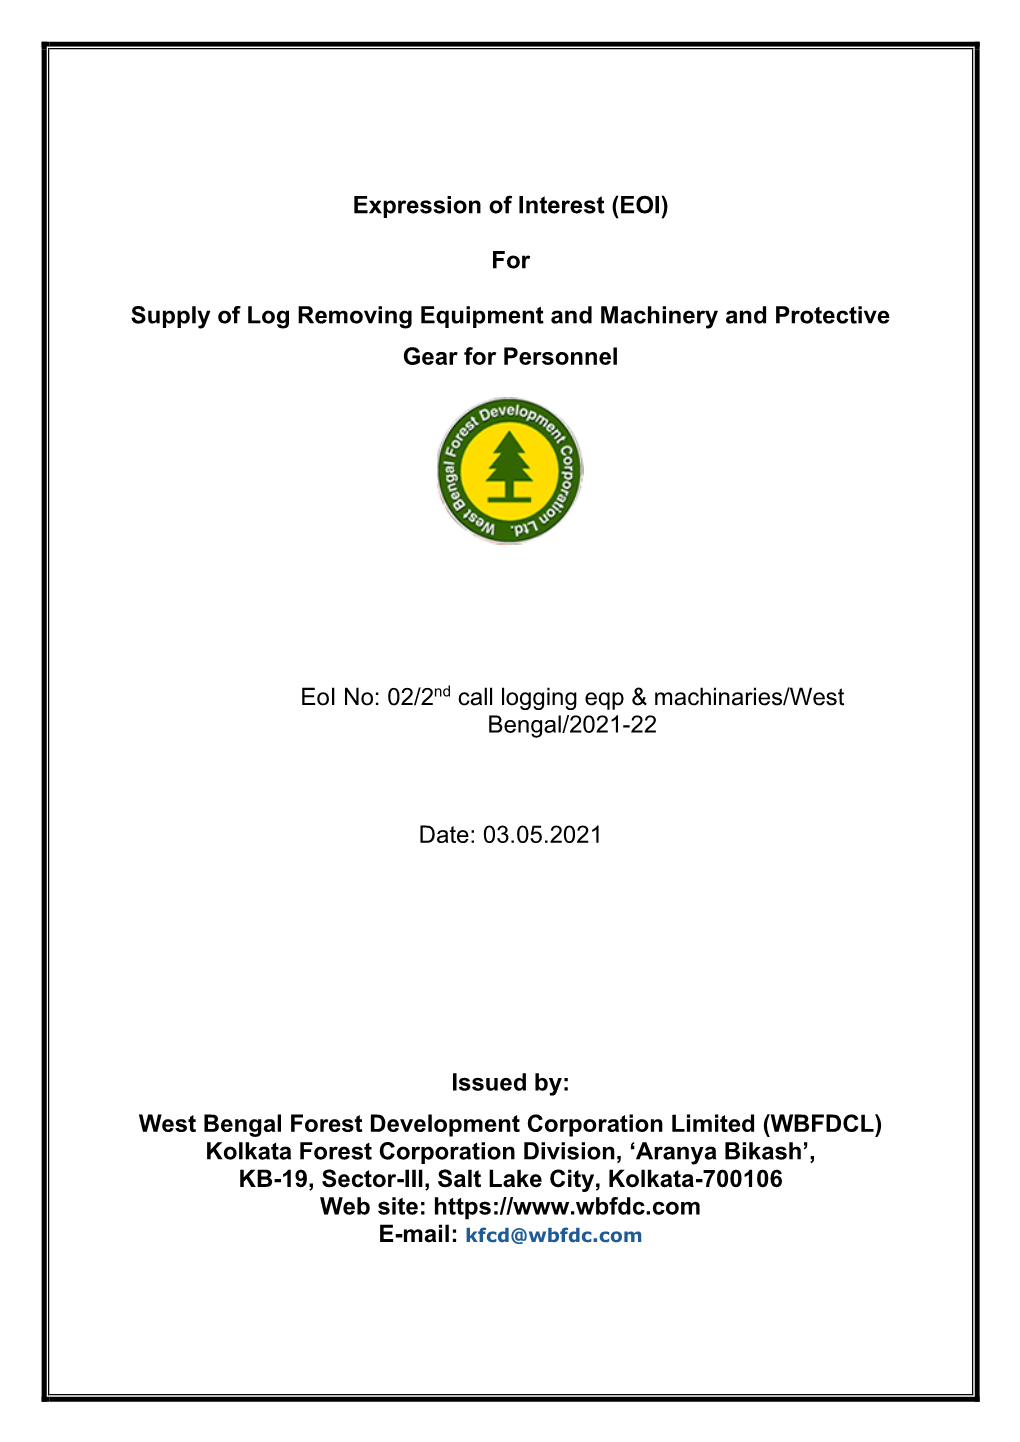 (EOI) for Supply of Log Removing Equipment and Machinery and Protective Gear for Personnel